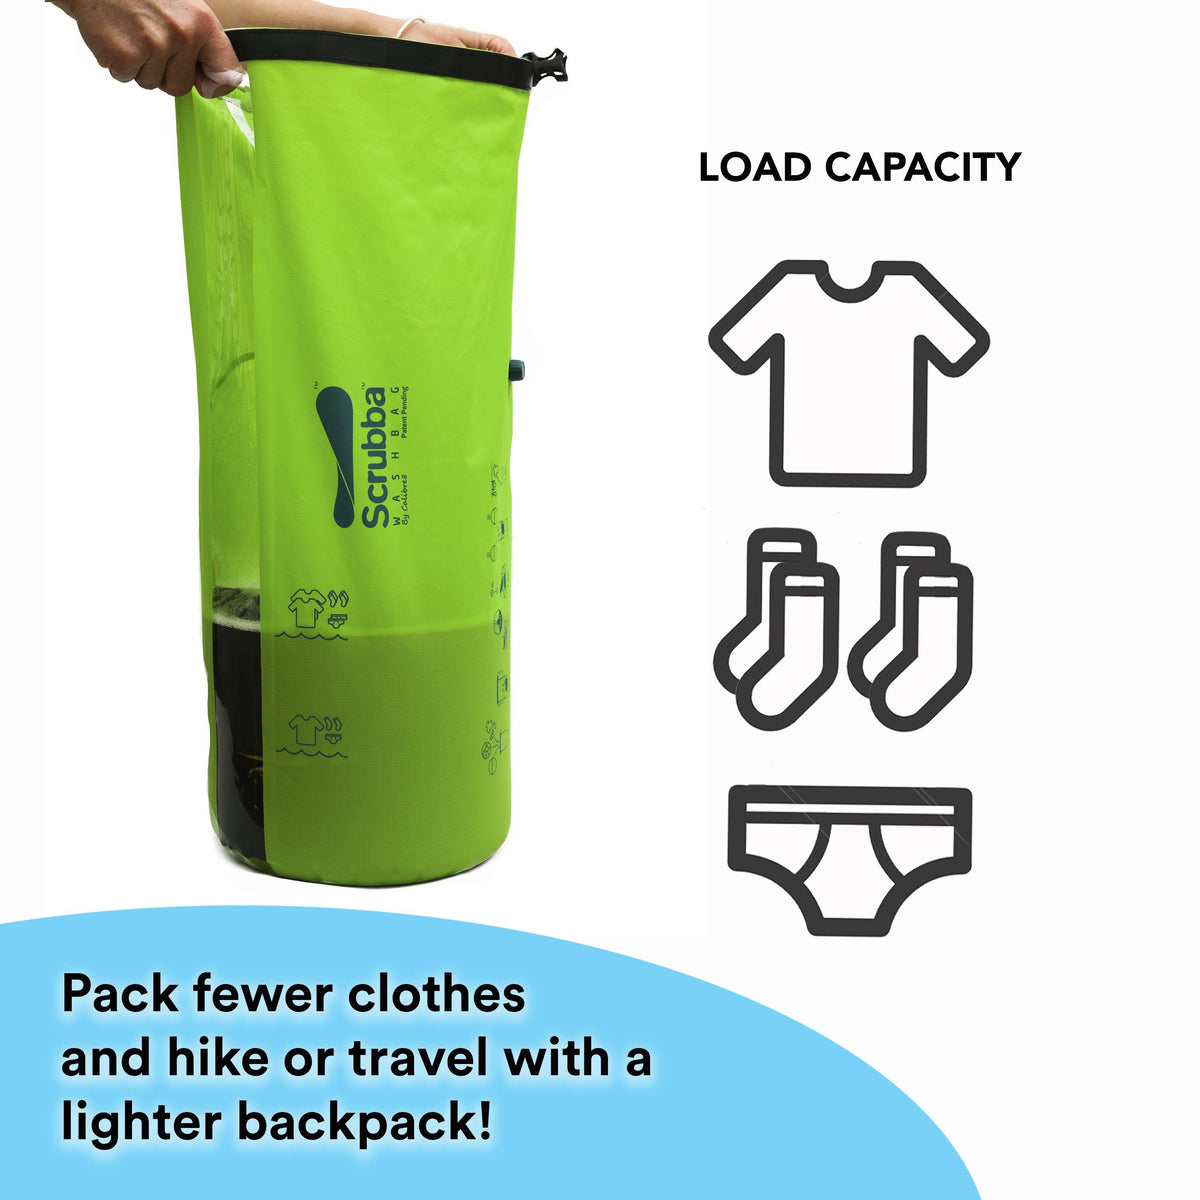 Scrubba Portable Wash Bag - Foldable Hand Washing Machine for Hotel and  Travel - Light and Small Eco…See more Scrubba Portable Wash Bag - Foldable